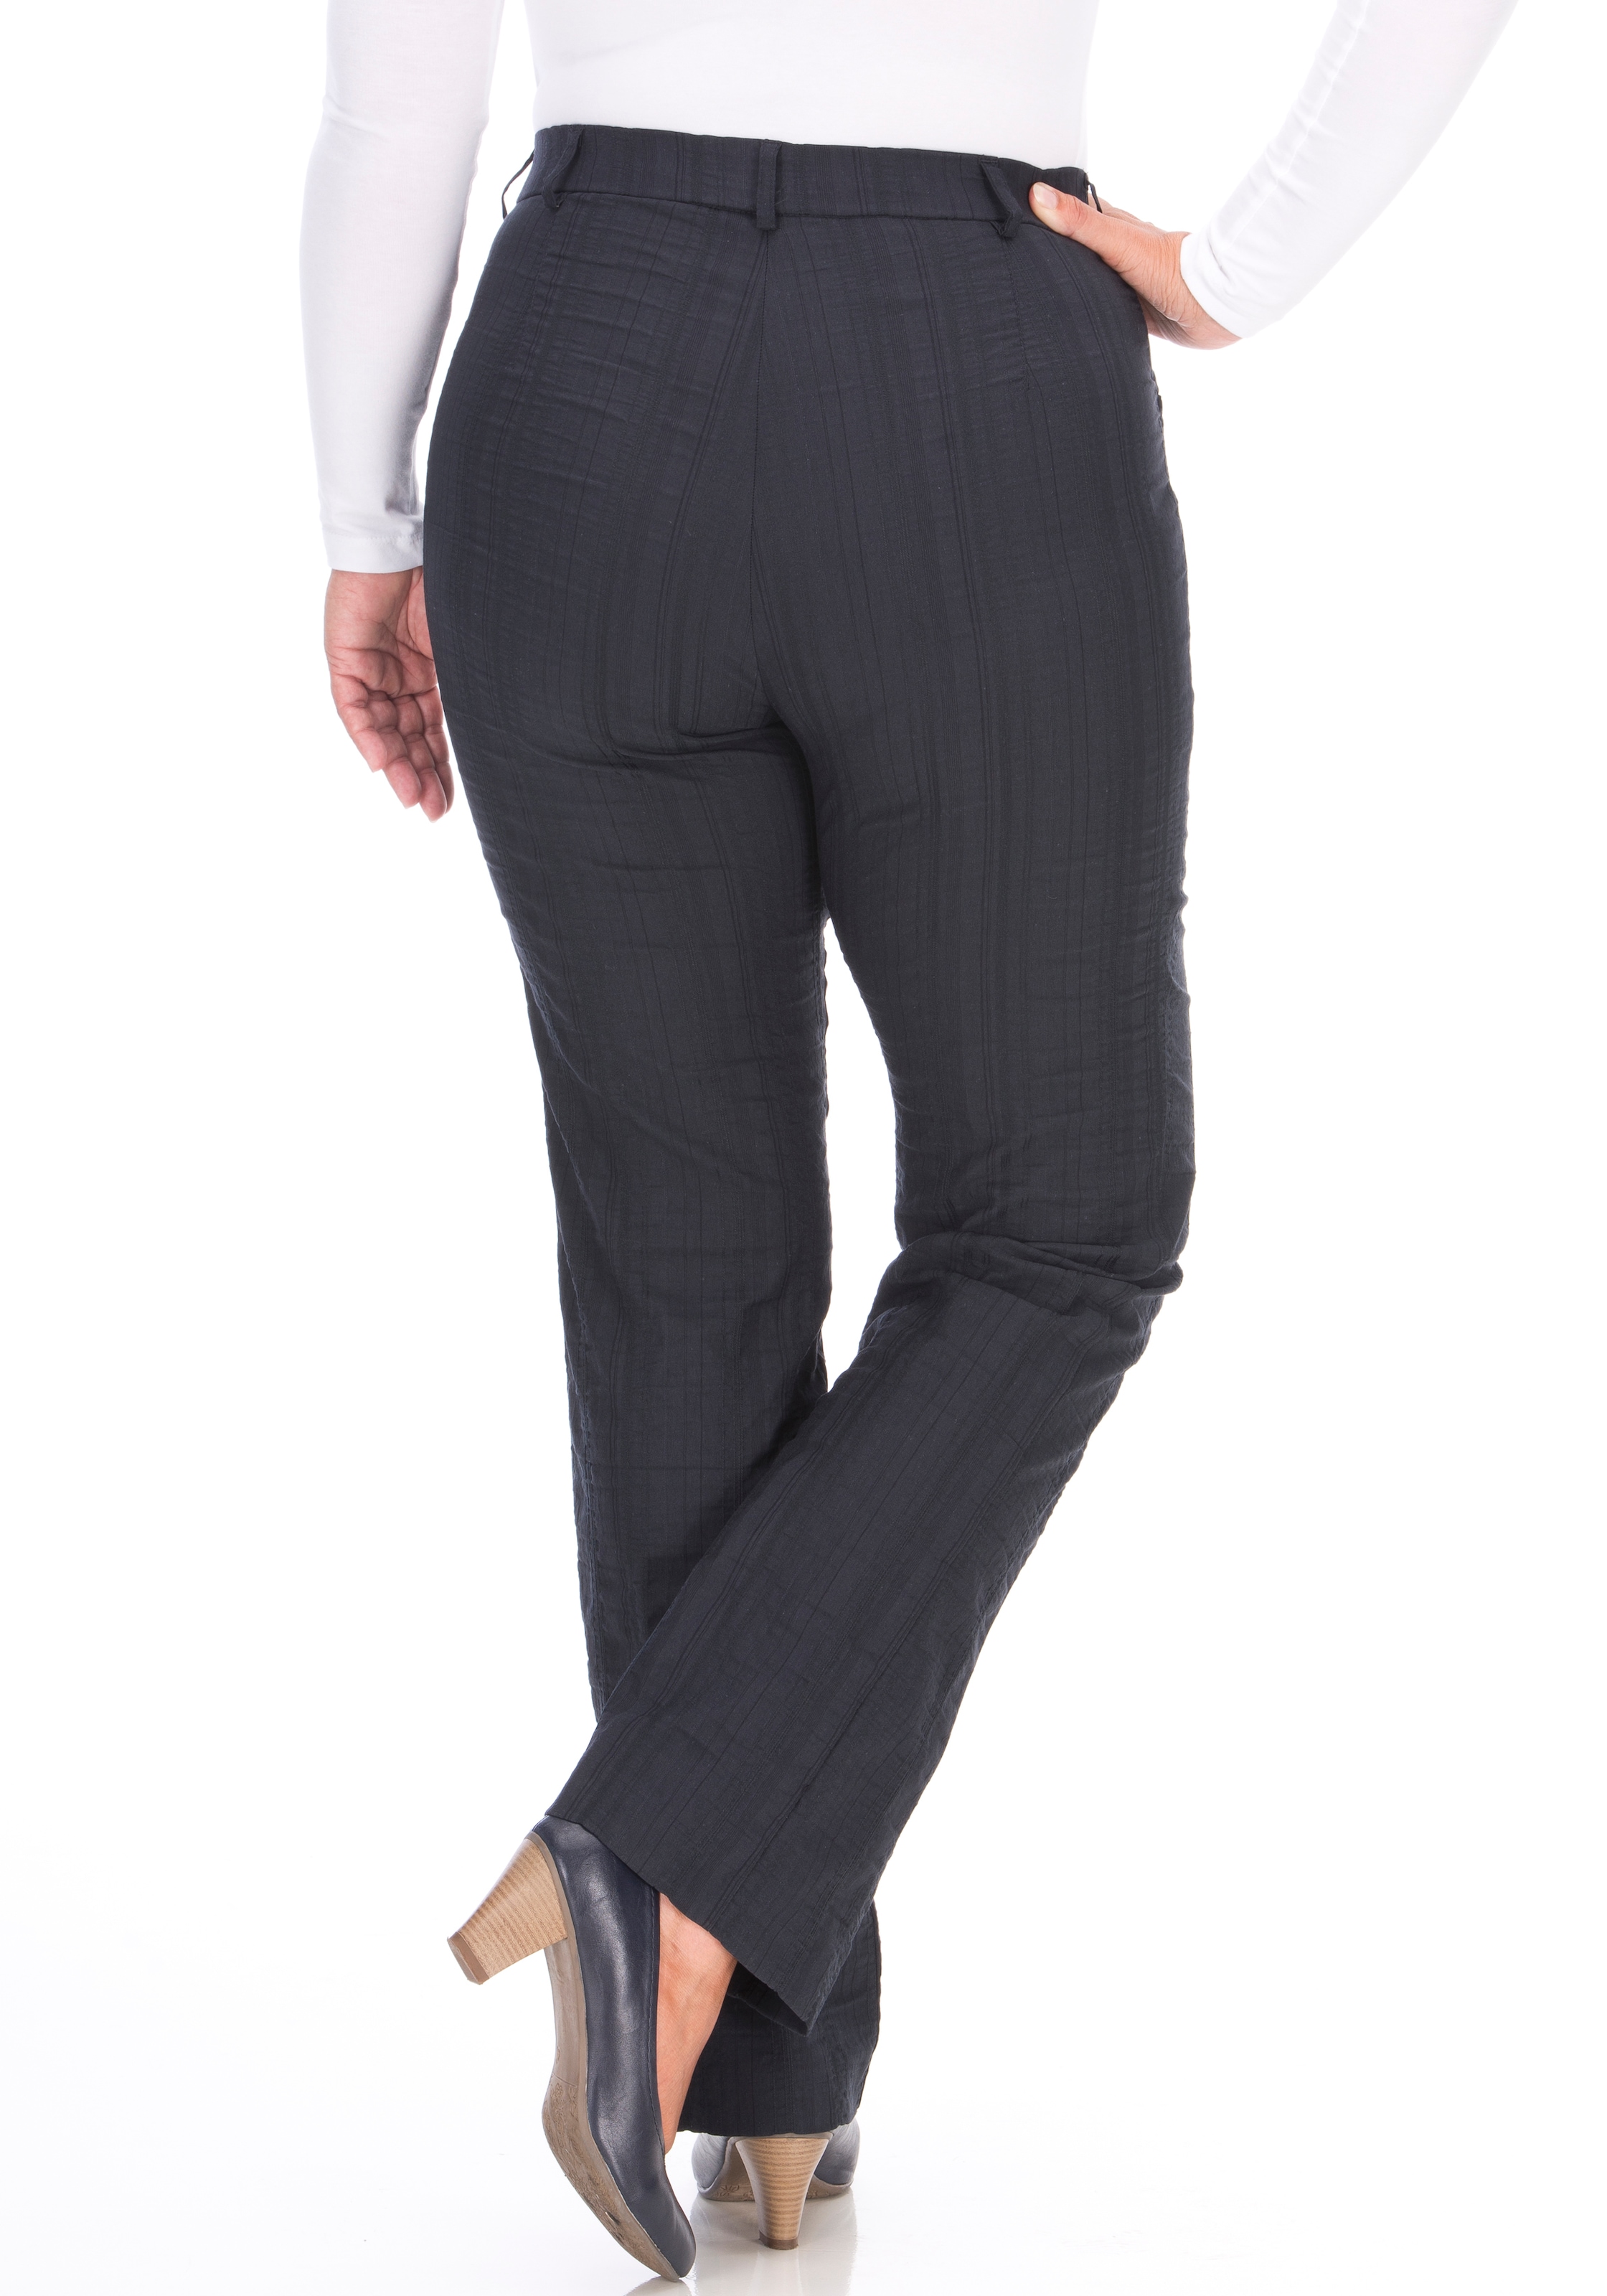 KjBRAND Stoffhose bei optimale ♕ Quer-Stretch Passform »Bea«, in